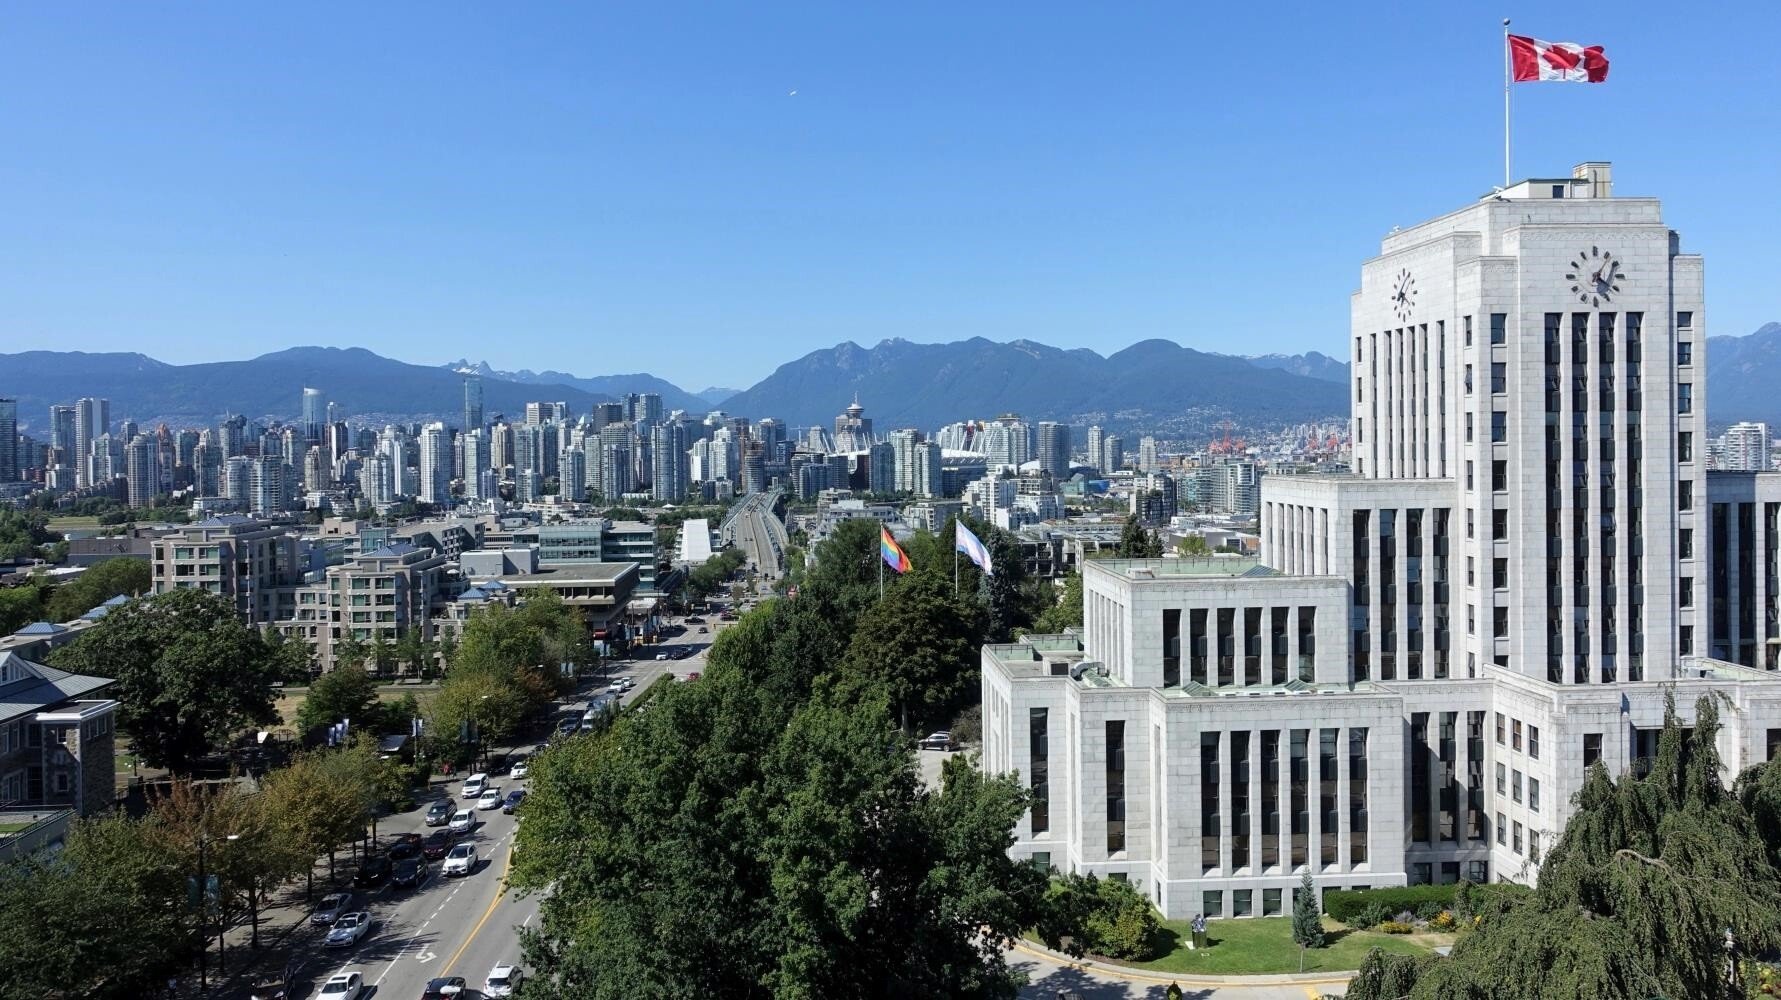 Vancouver’s City Hall ceased accepting large cash payments of C$10,000 or more in 2019, in response to concerns about the potential for money laundering. Photo: Ian Young